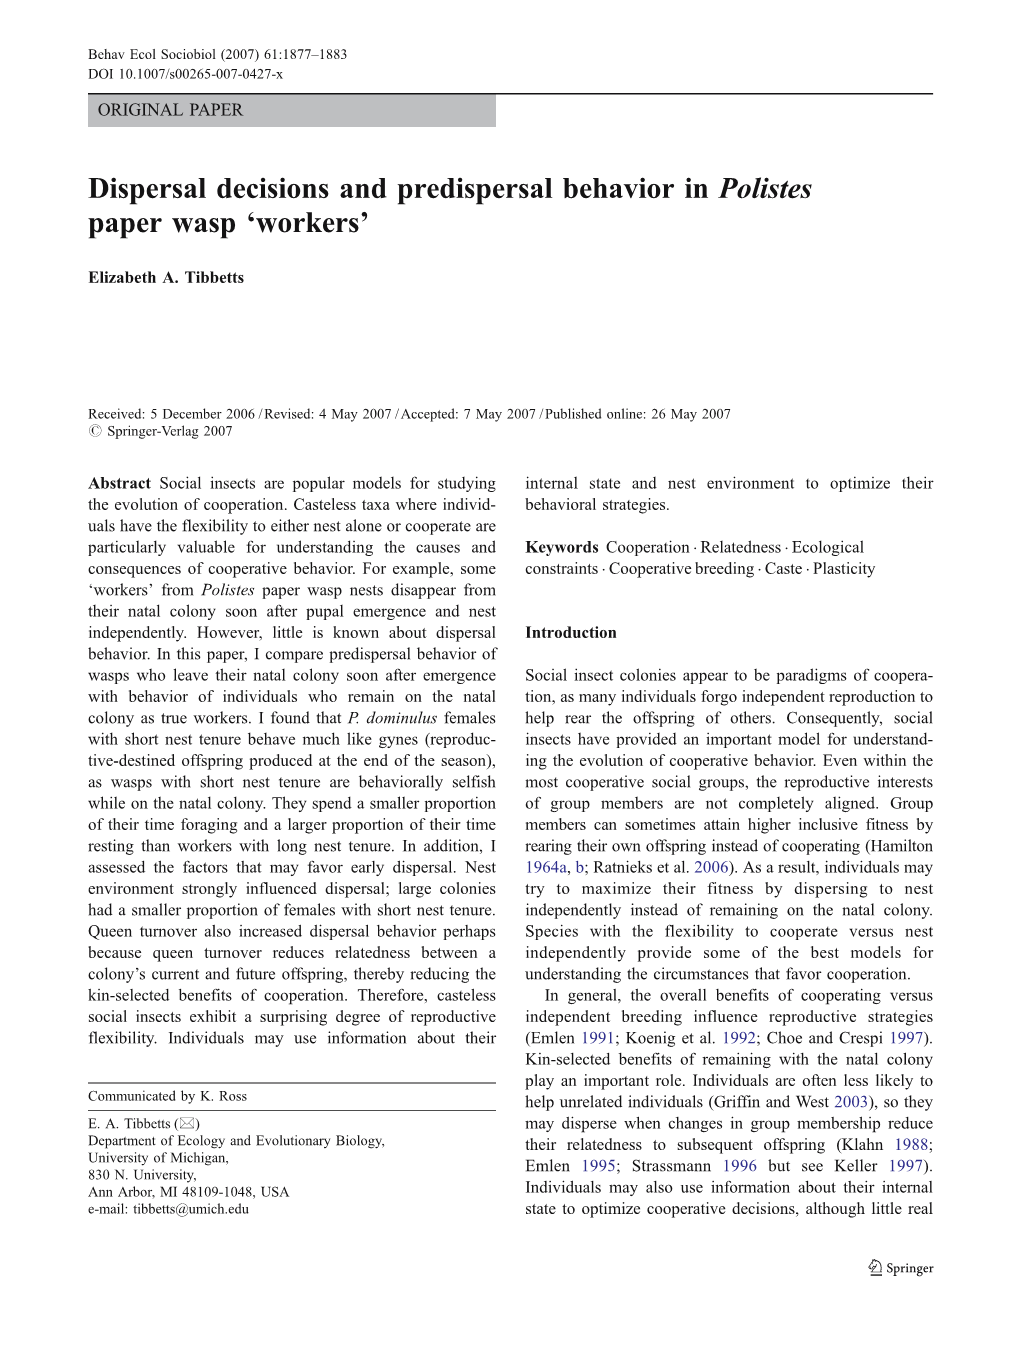 Dispersal Decisions and Predispersal Behavior in Polistes Paper Wasp ‘Workers’